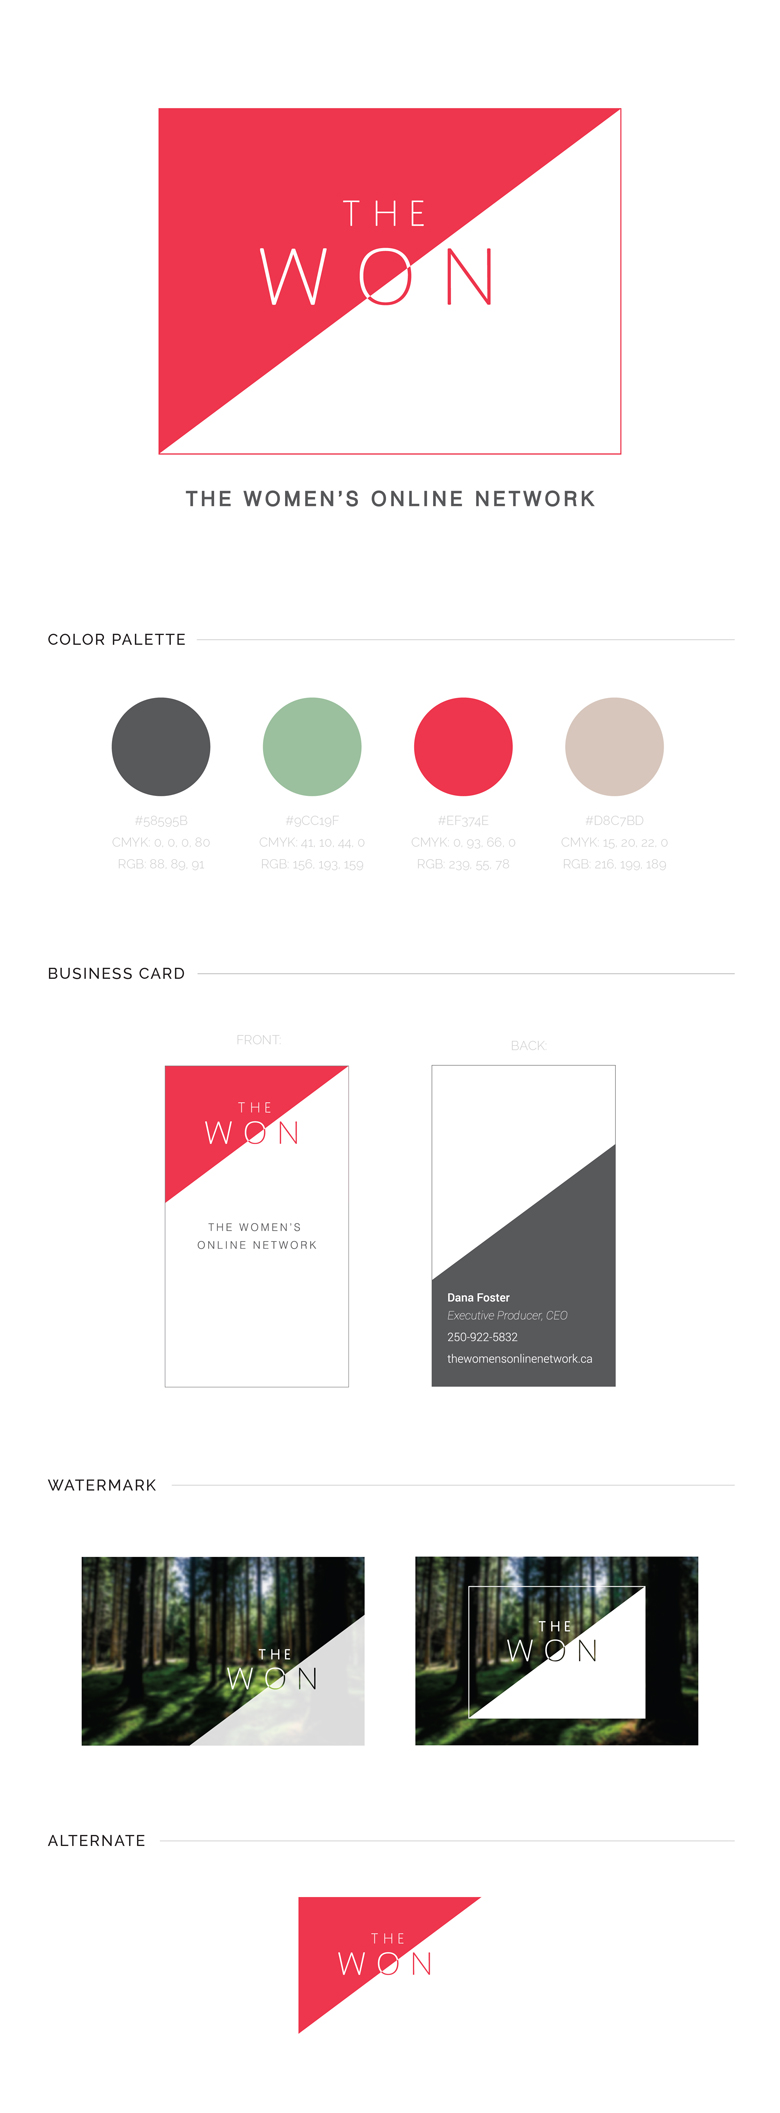 Business Brand Guidelines